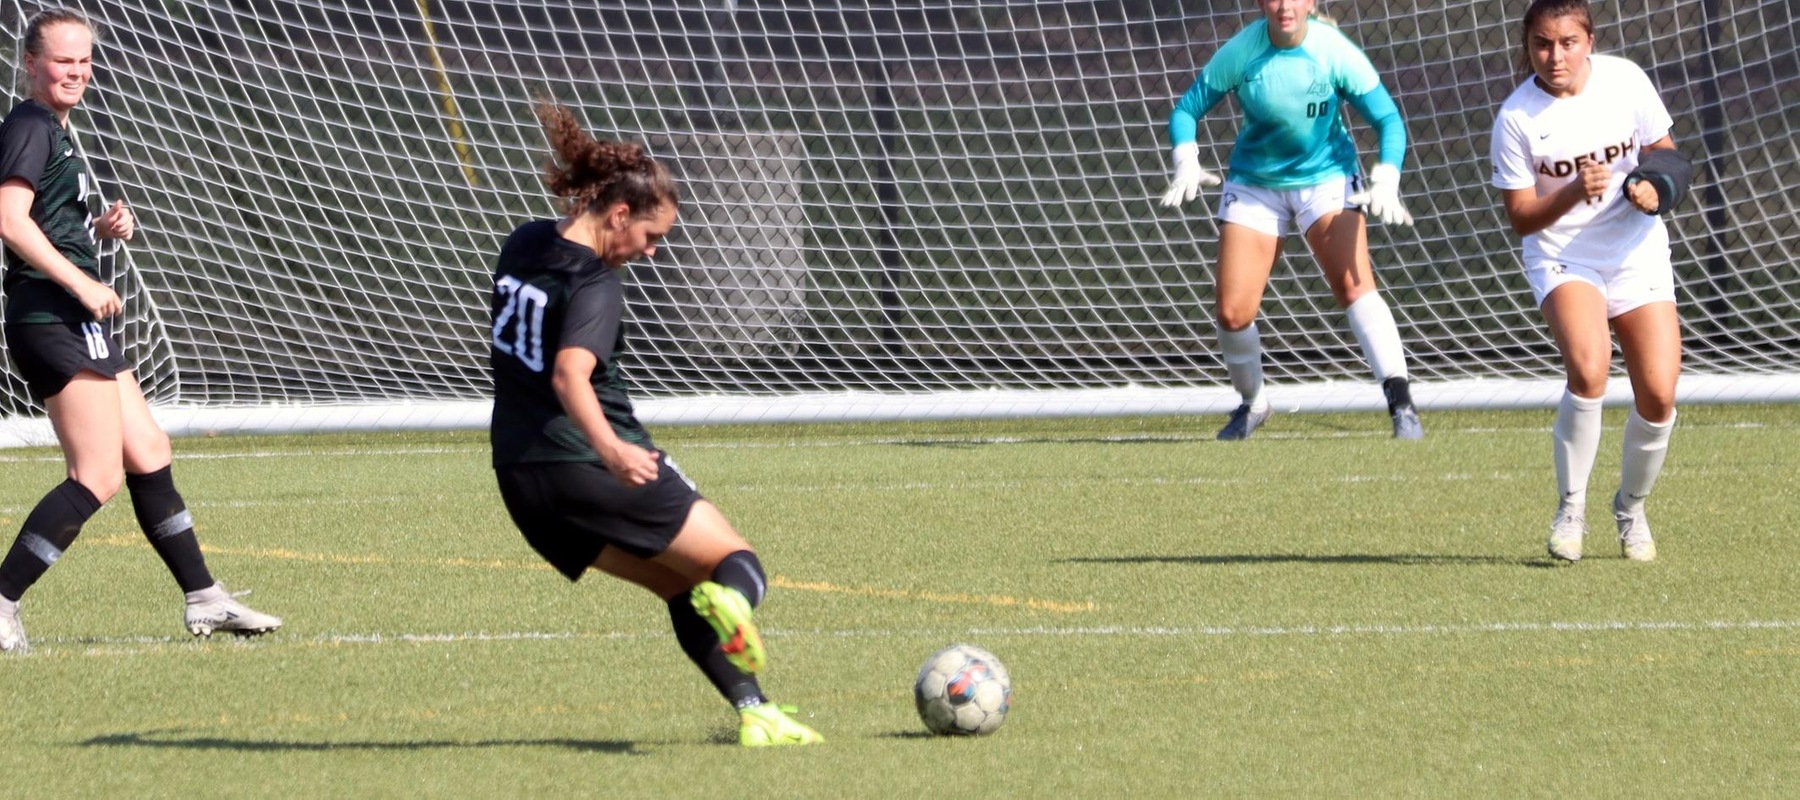 File photo of Samantha Emmi who scored two goals at Chestnut Hill. Copyright 2022; Wilmington University. All rights reserved. Photo by Dan Lauletta. August 28, 2022 vs. Adelphi.